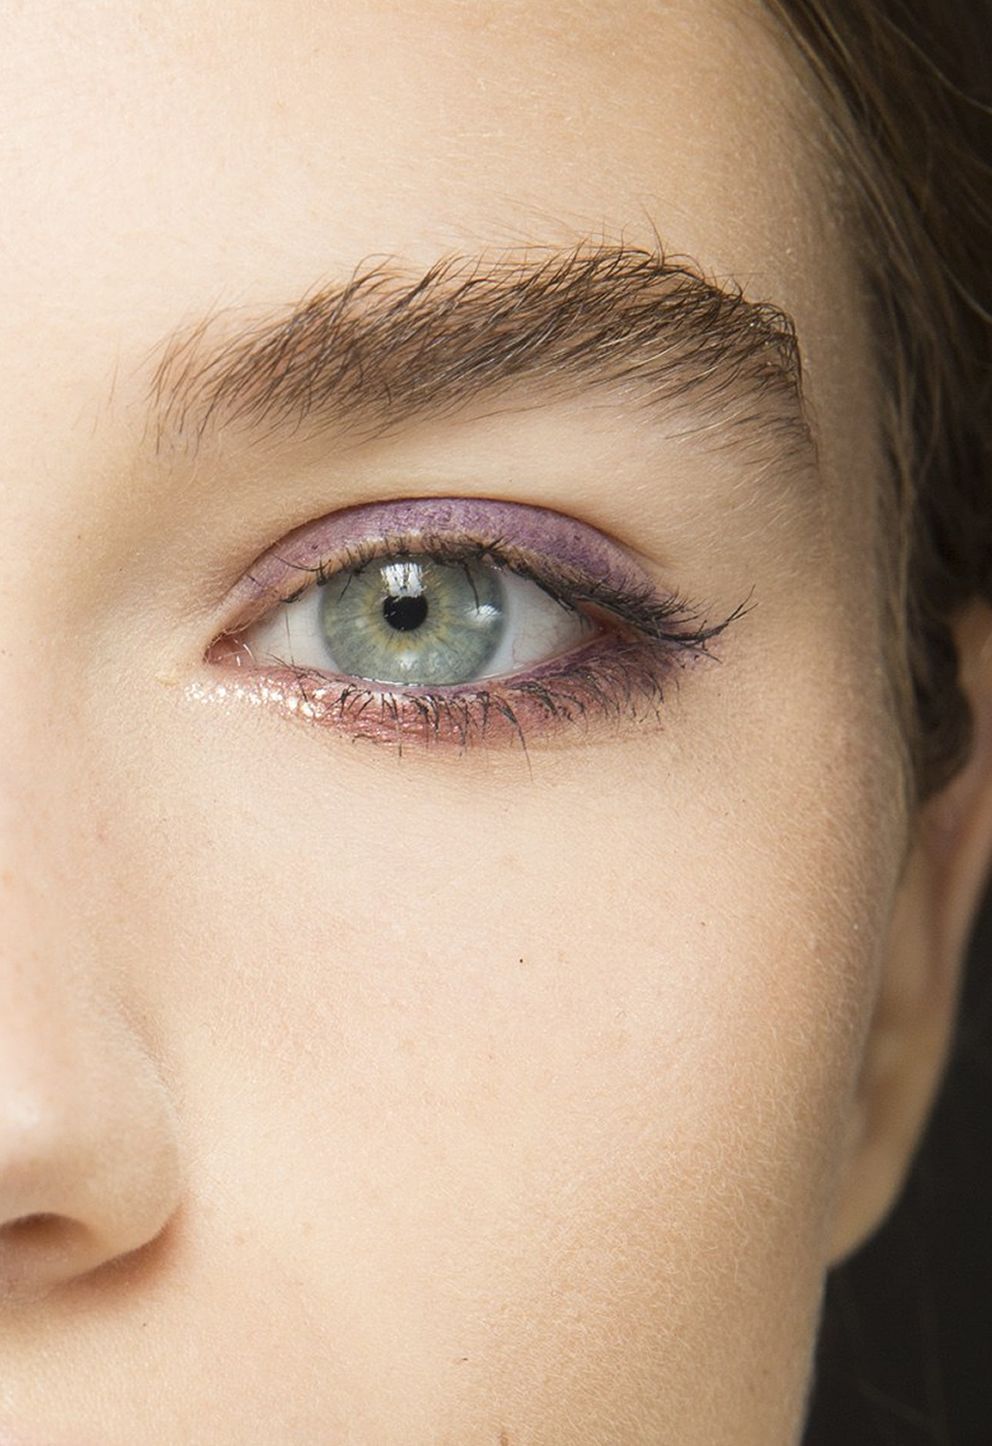 makeup tips — how to wear purple eye makeup (for green eyes)